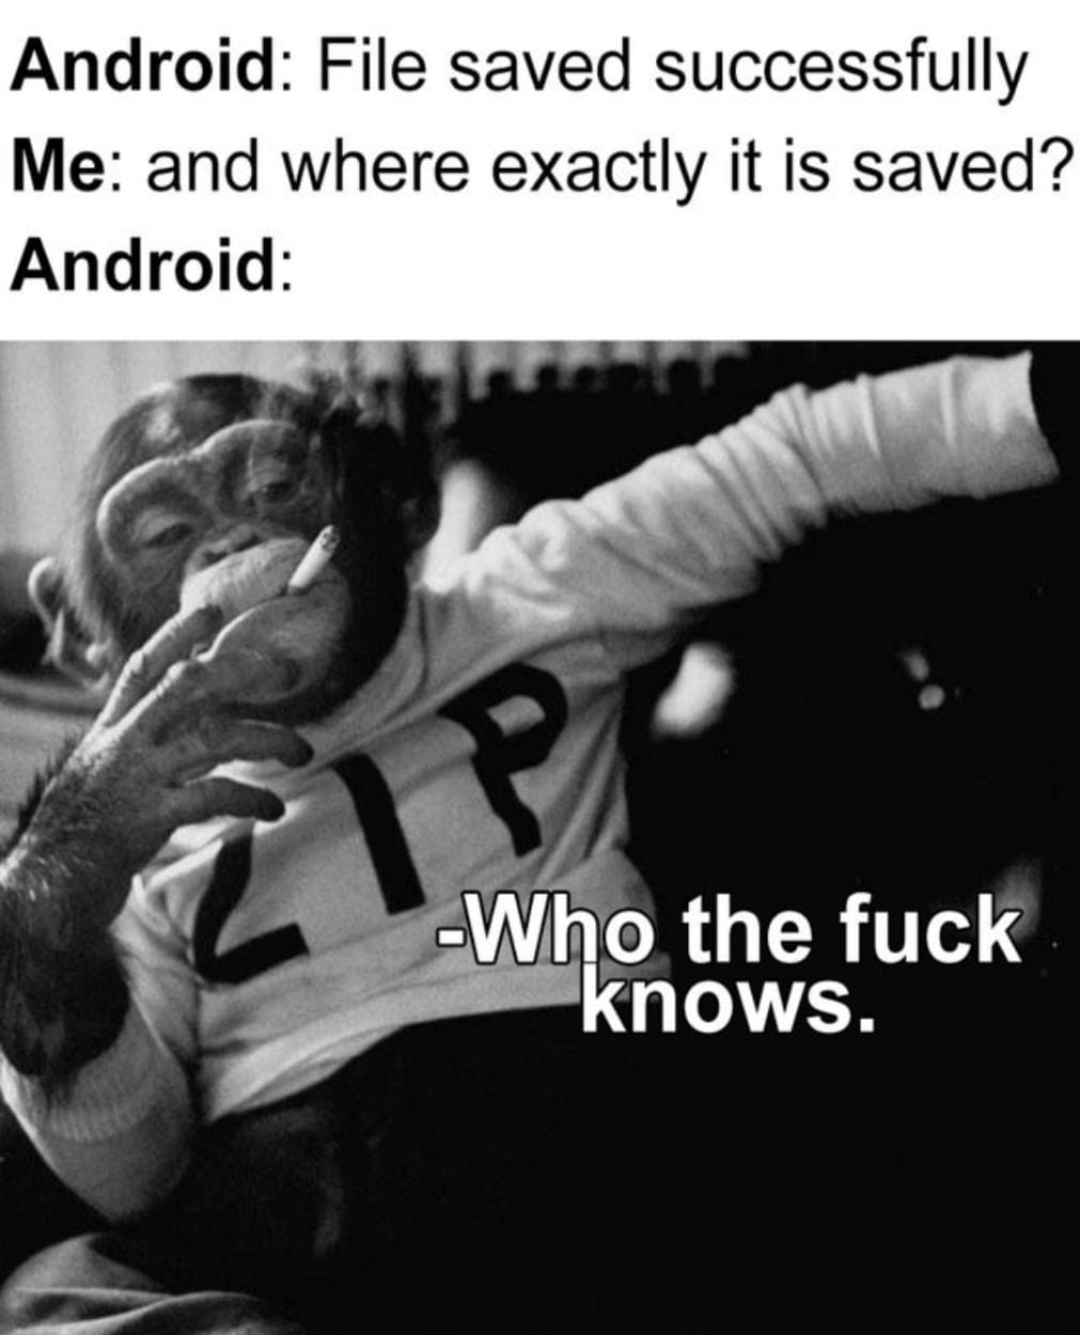 Android is definitely user friendly.